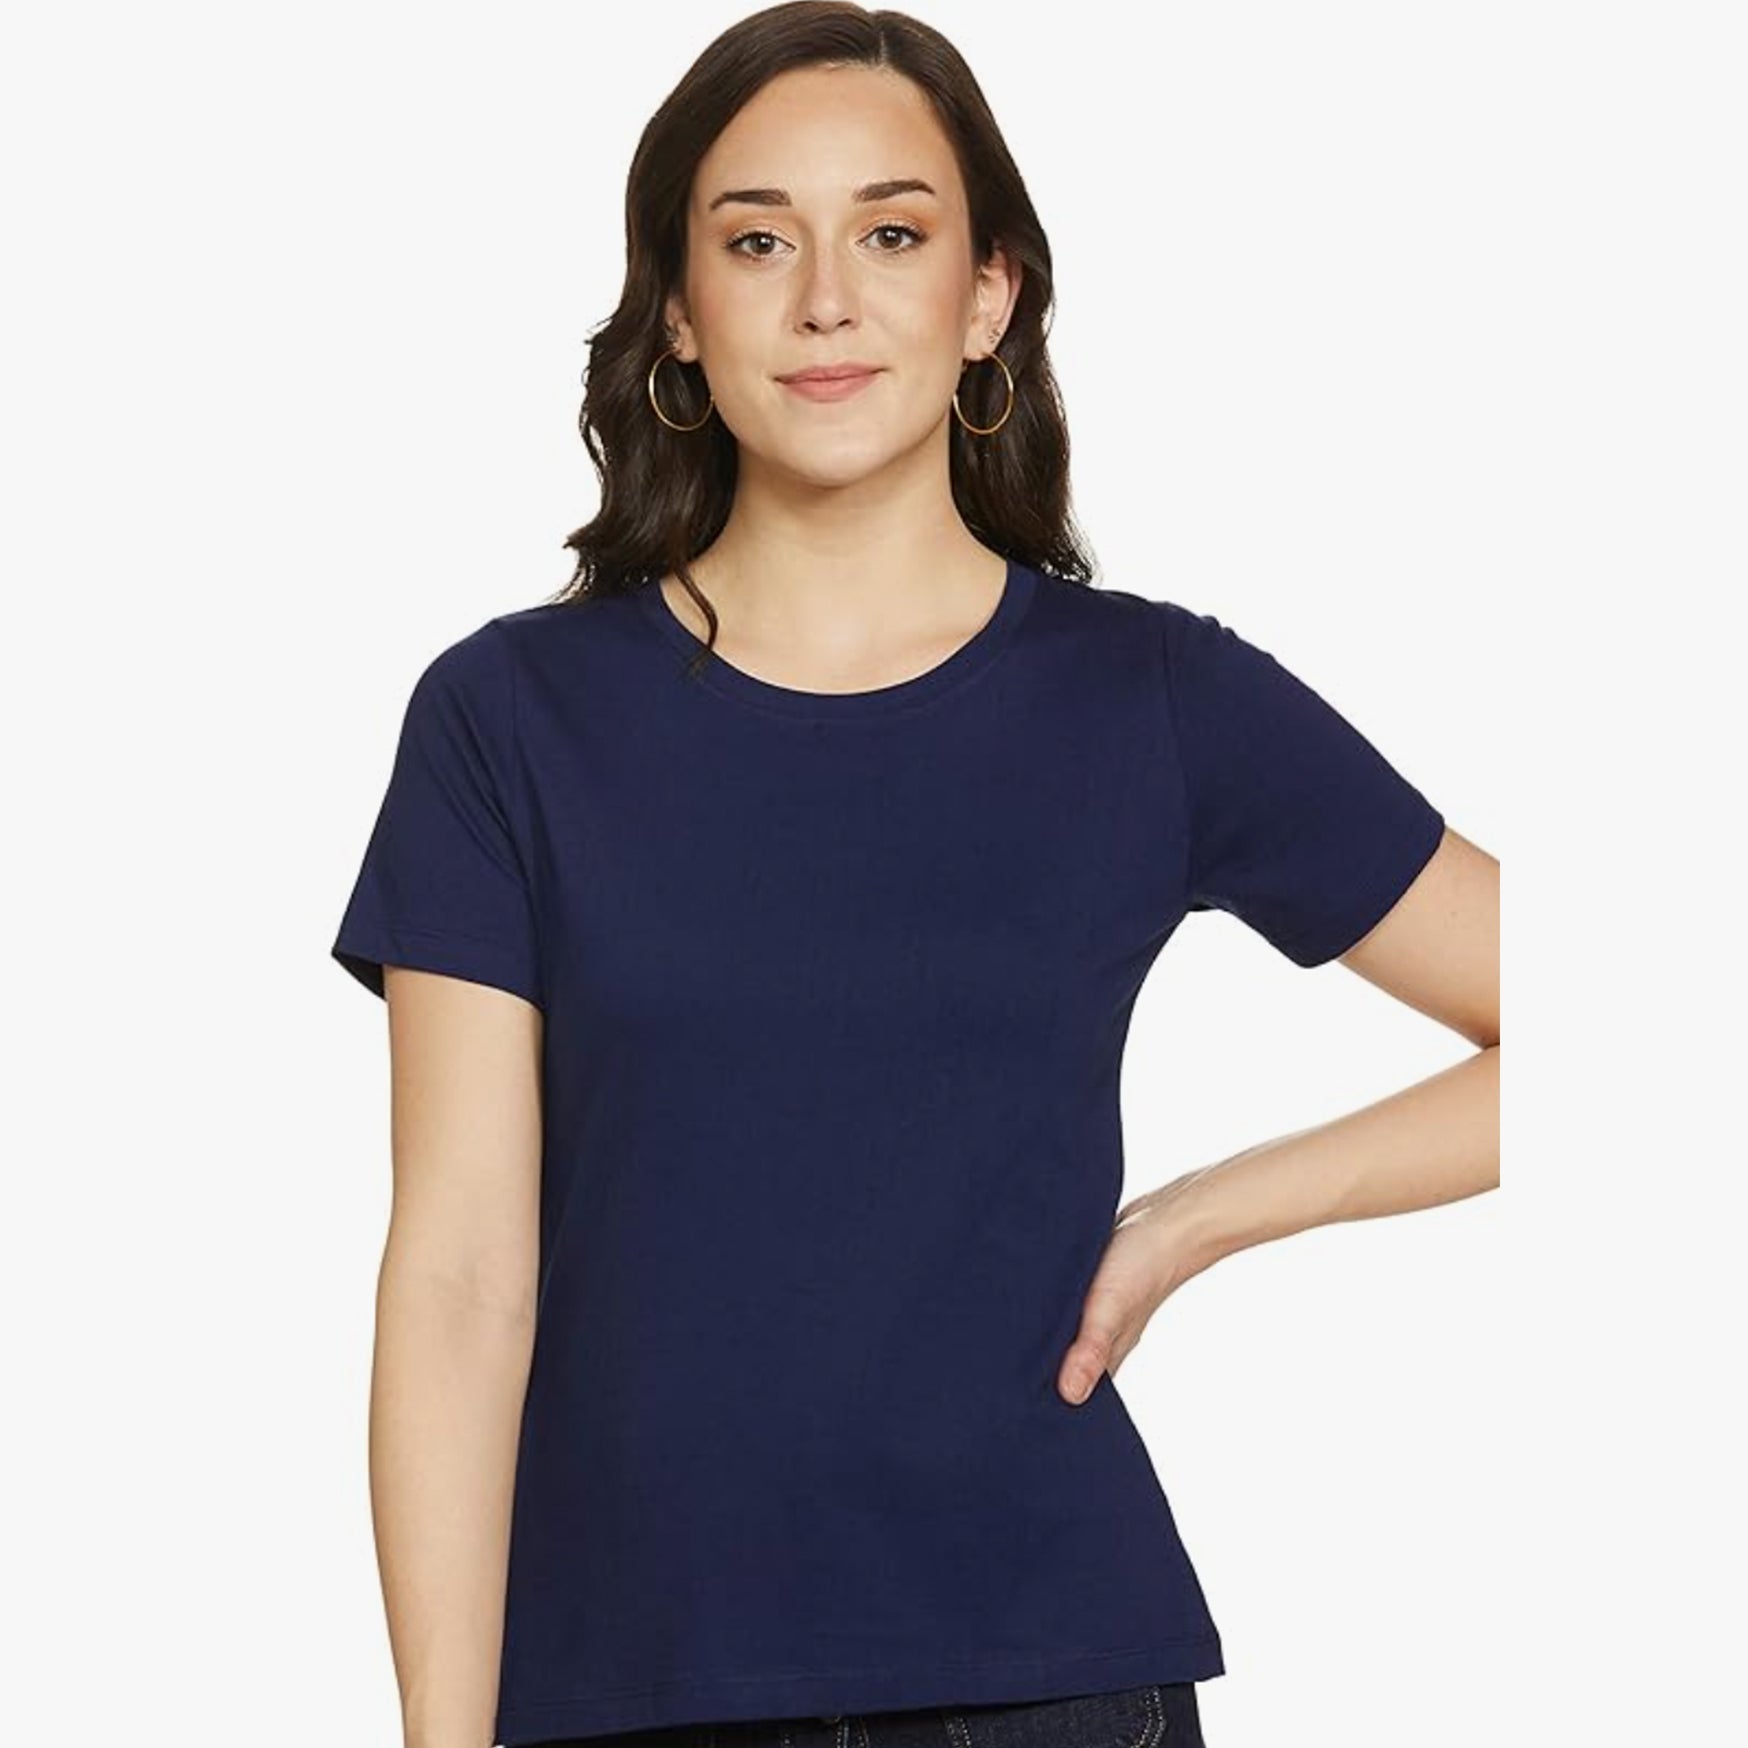 Styleville.in Women's Solid Regular fit Top (STSF402483_Navy S)